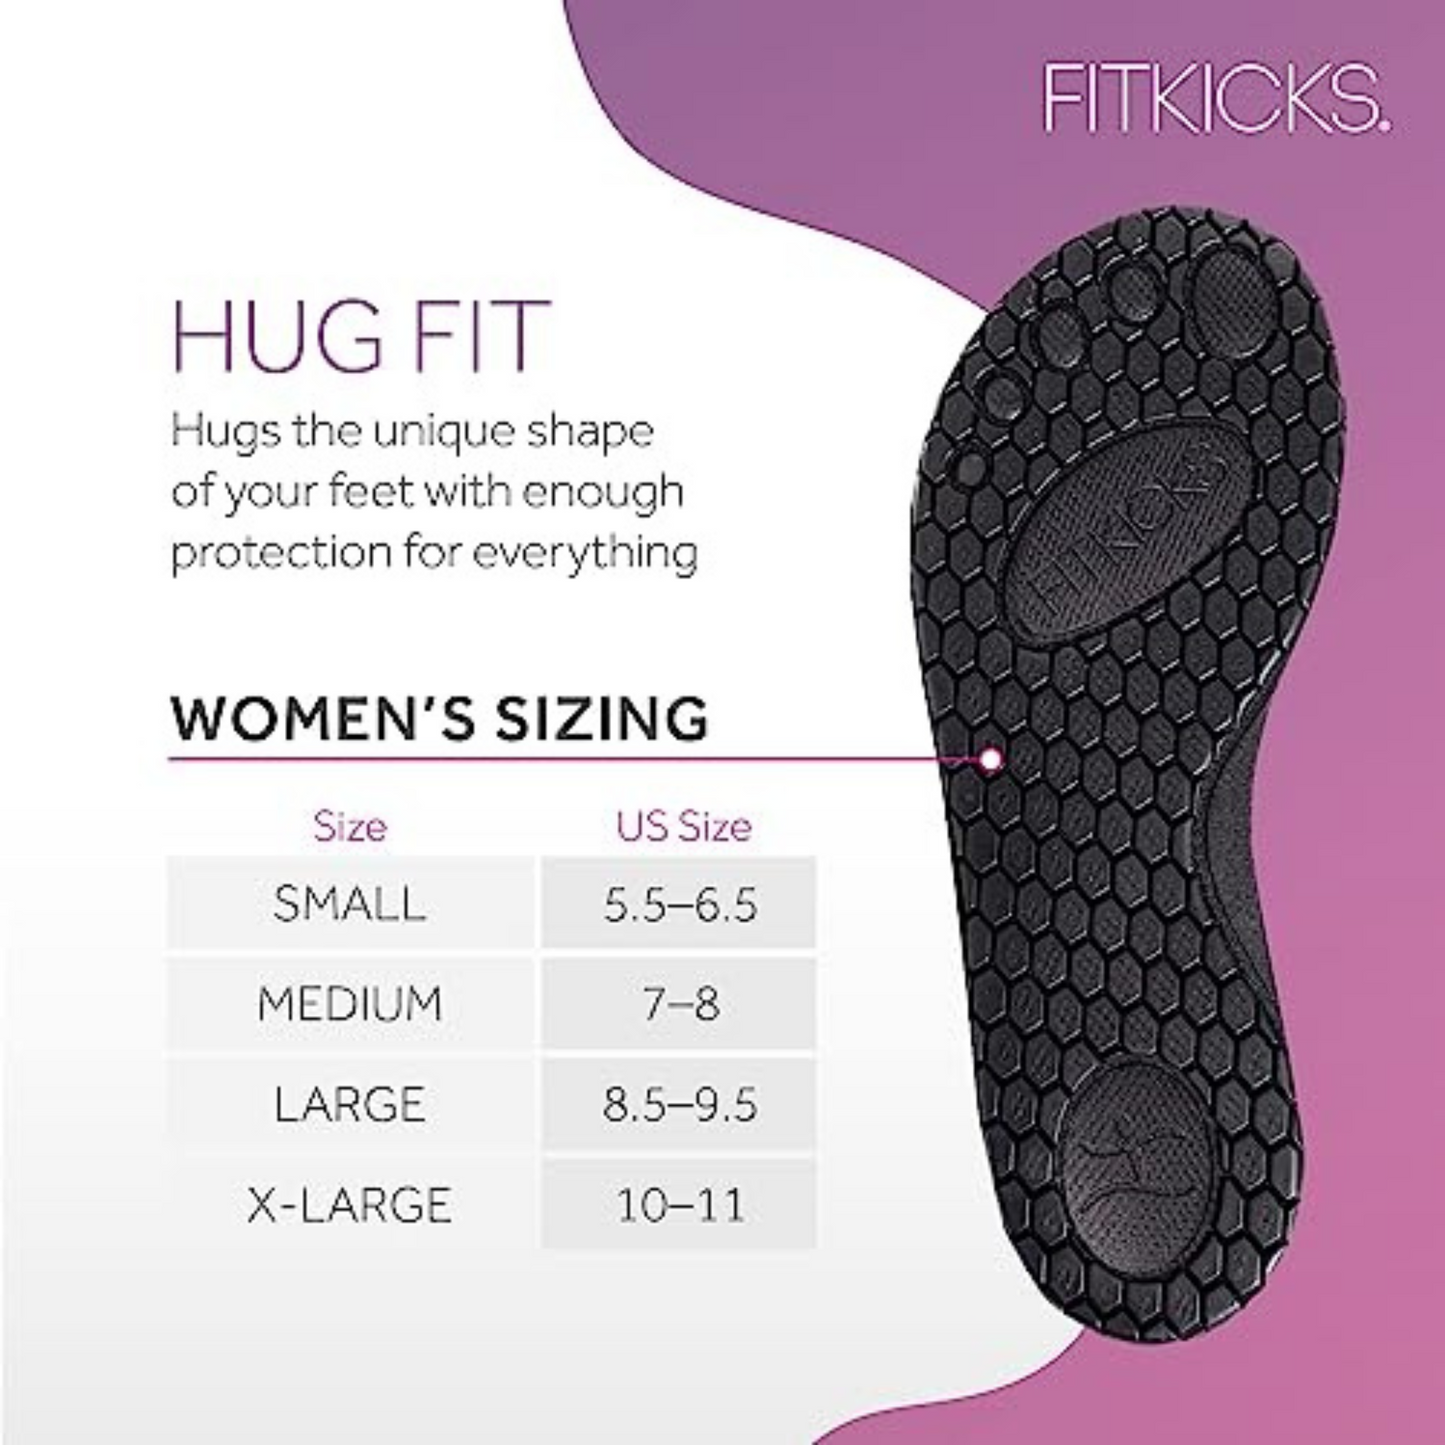 FitKicks active footwear size chart. Small is size 5.5-6.5; Medium is size 7-8; Large is size 8.5-9.5; XL is size 10-11